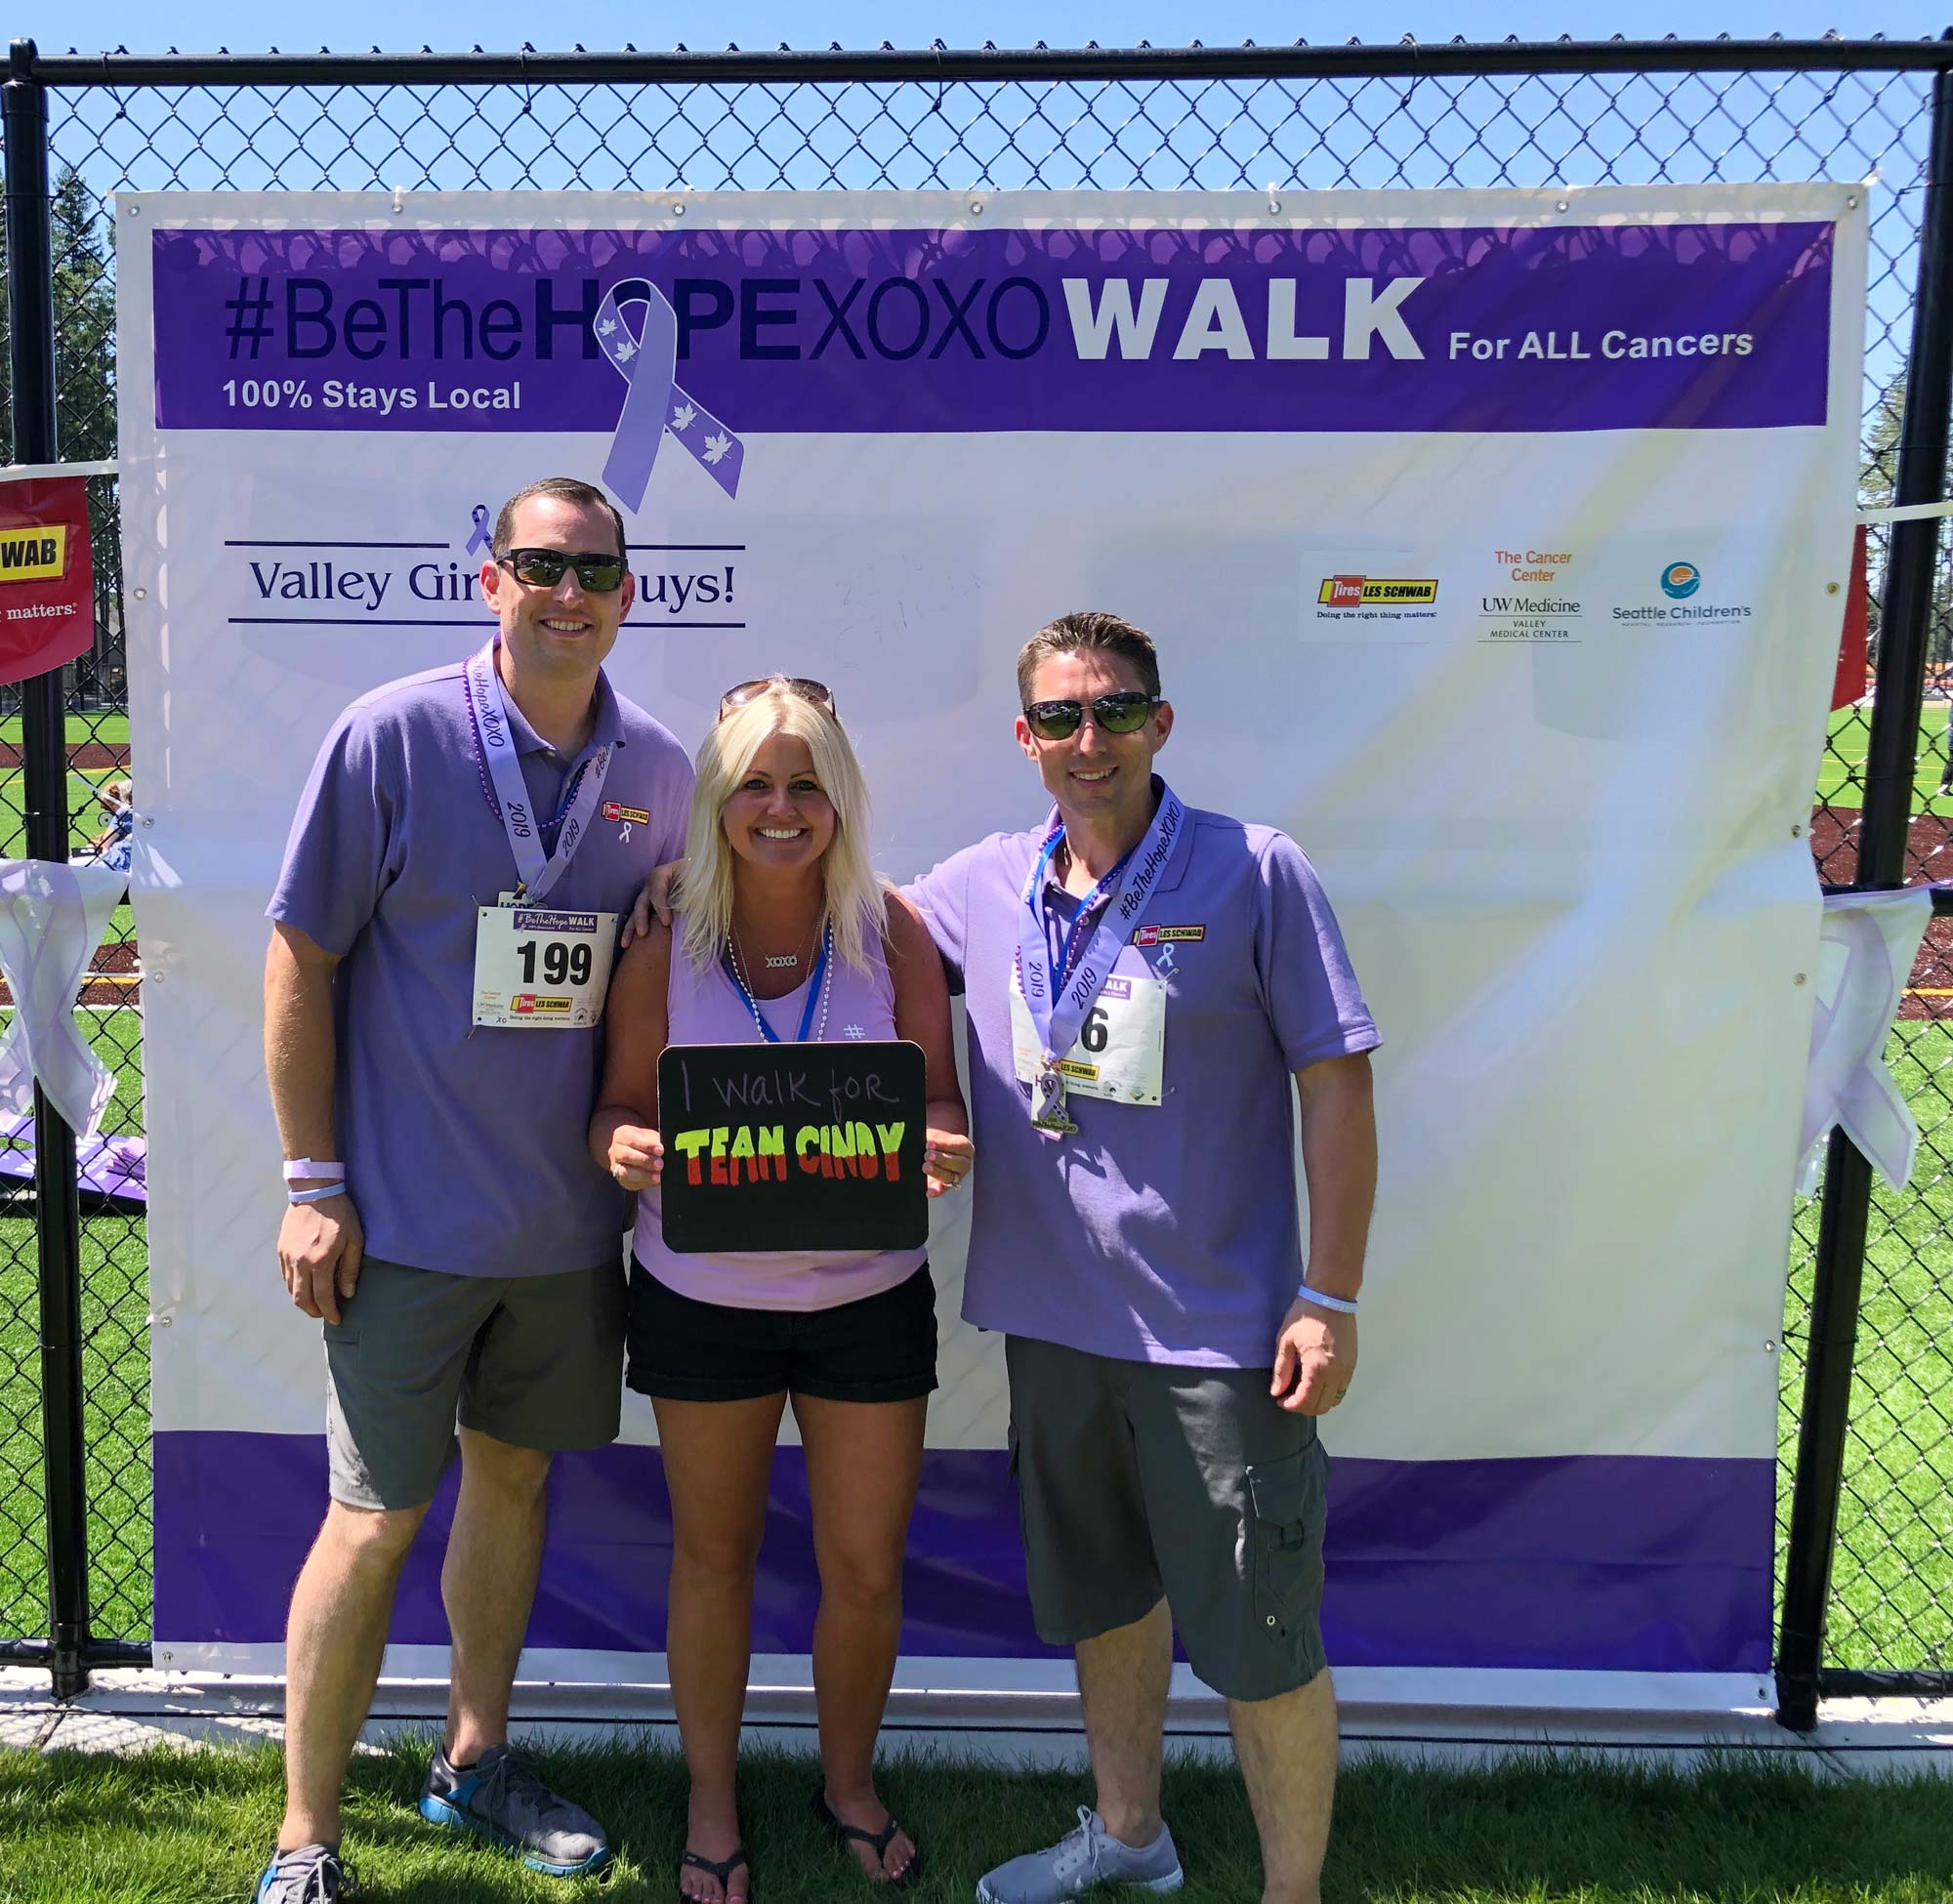 Les Schwab employees supporting the Be The HOPE Walk